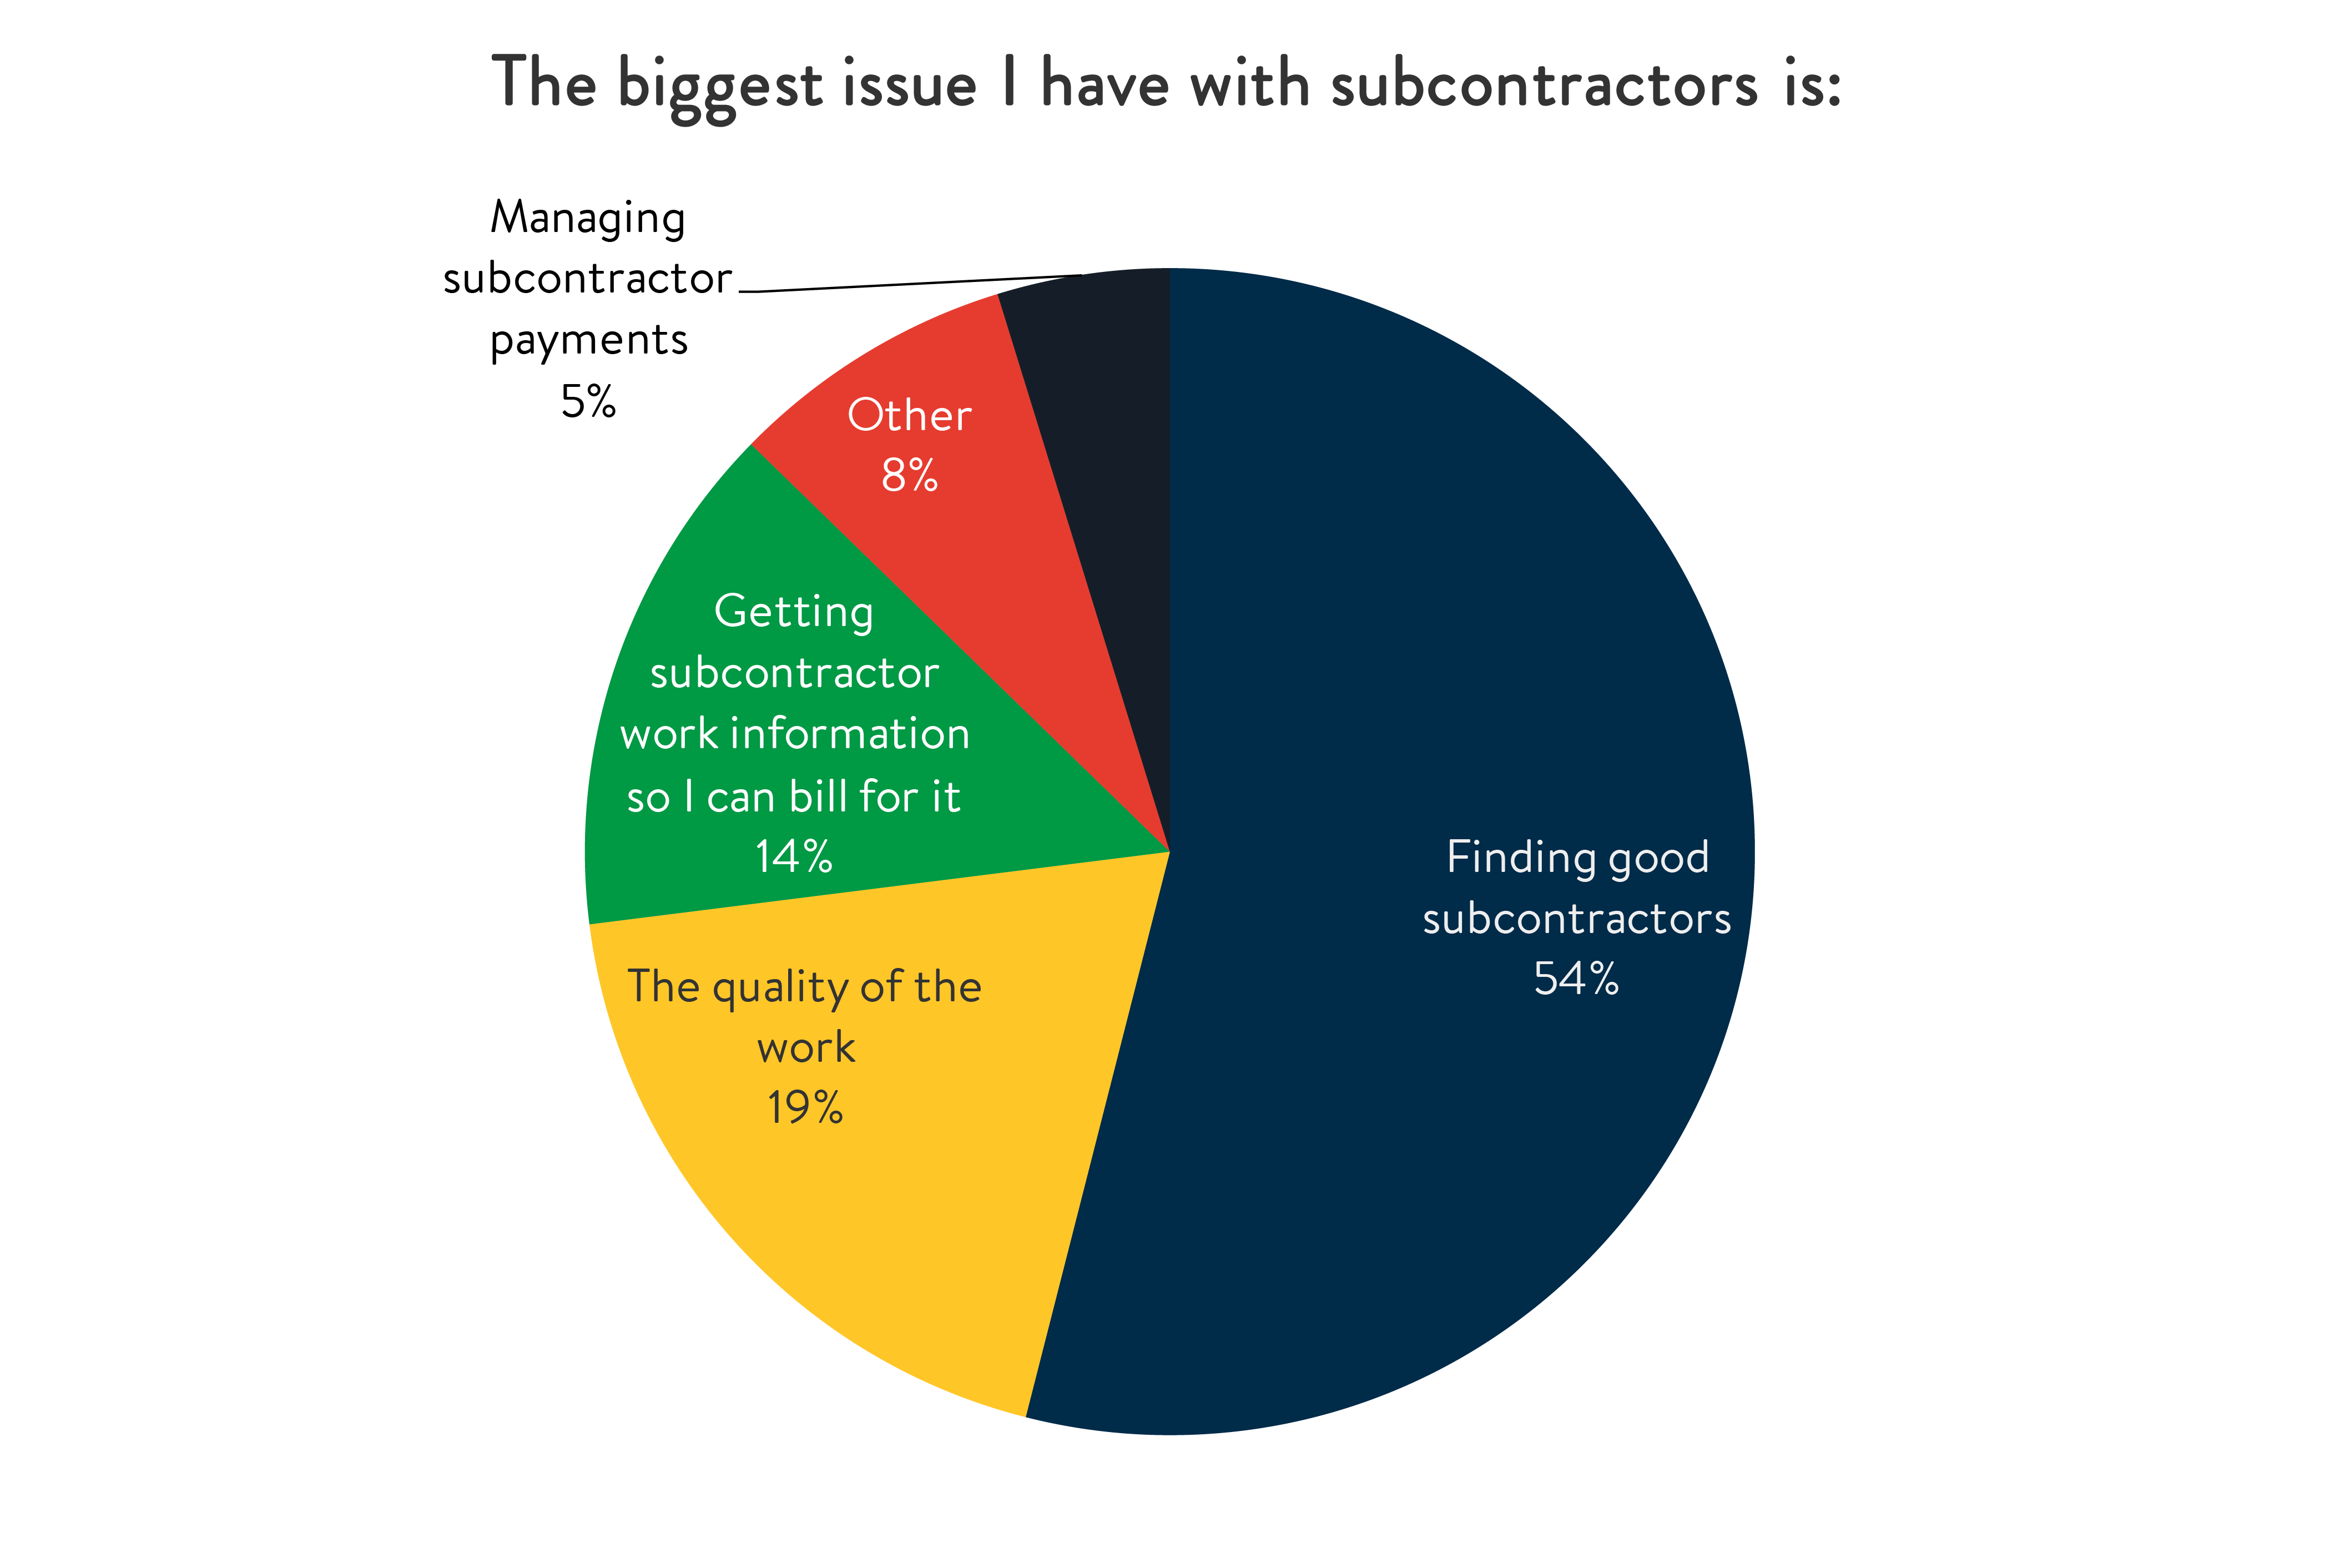 The biggest issue I have with subcontractors is